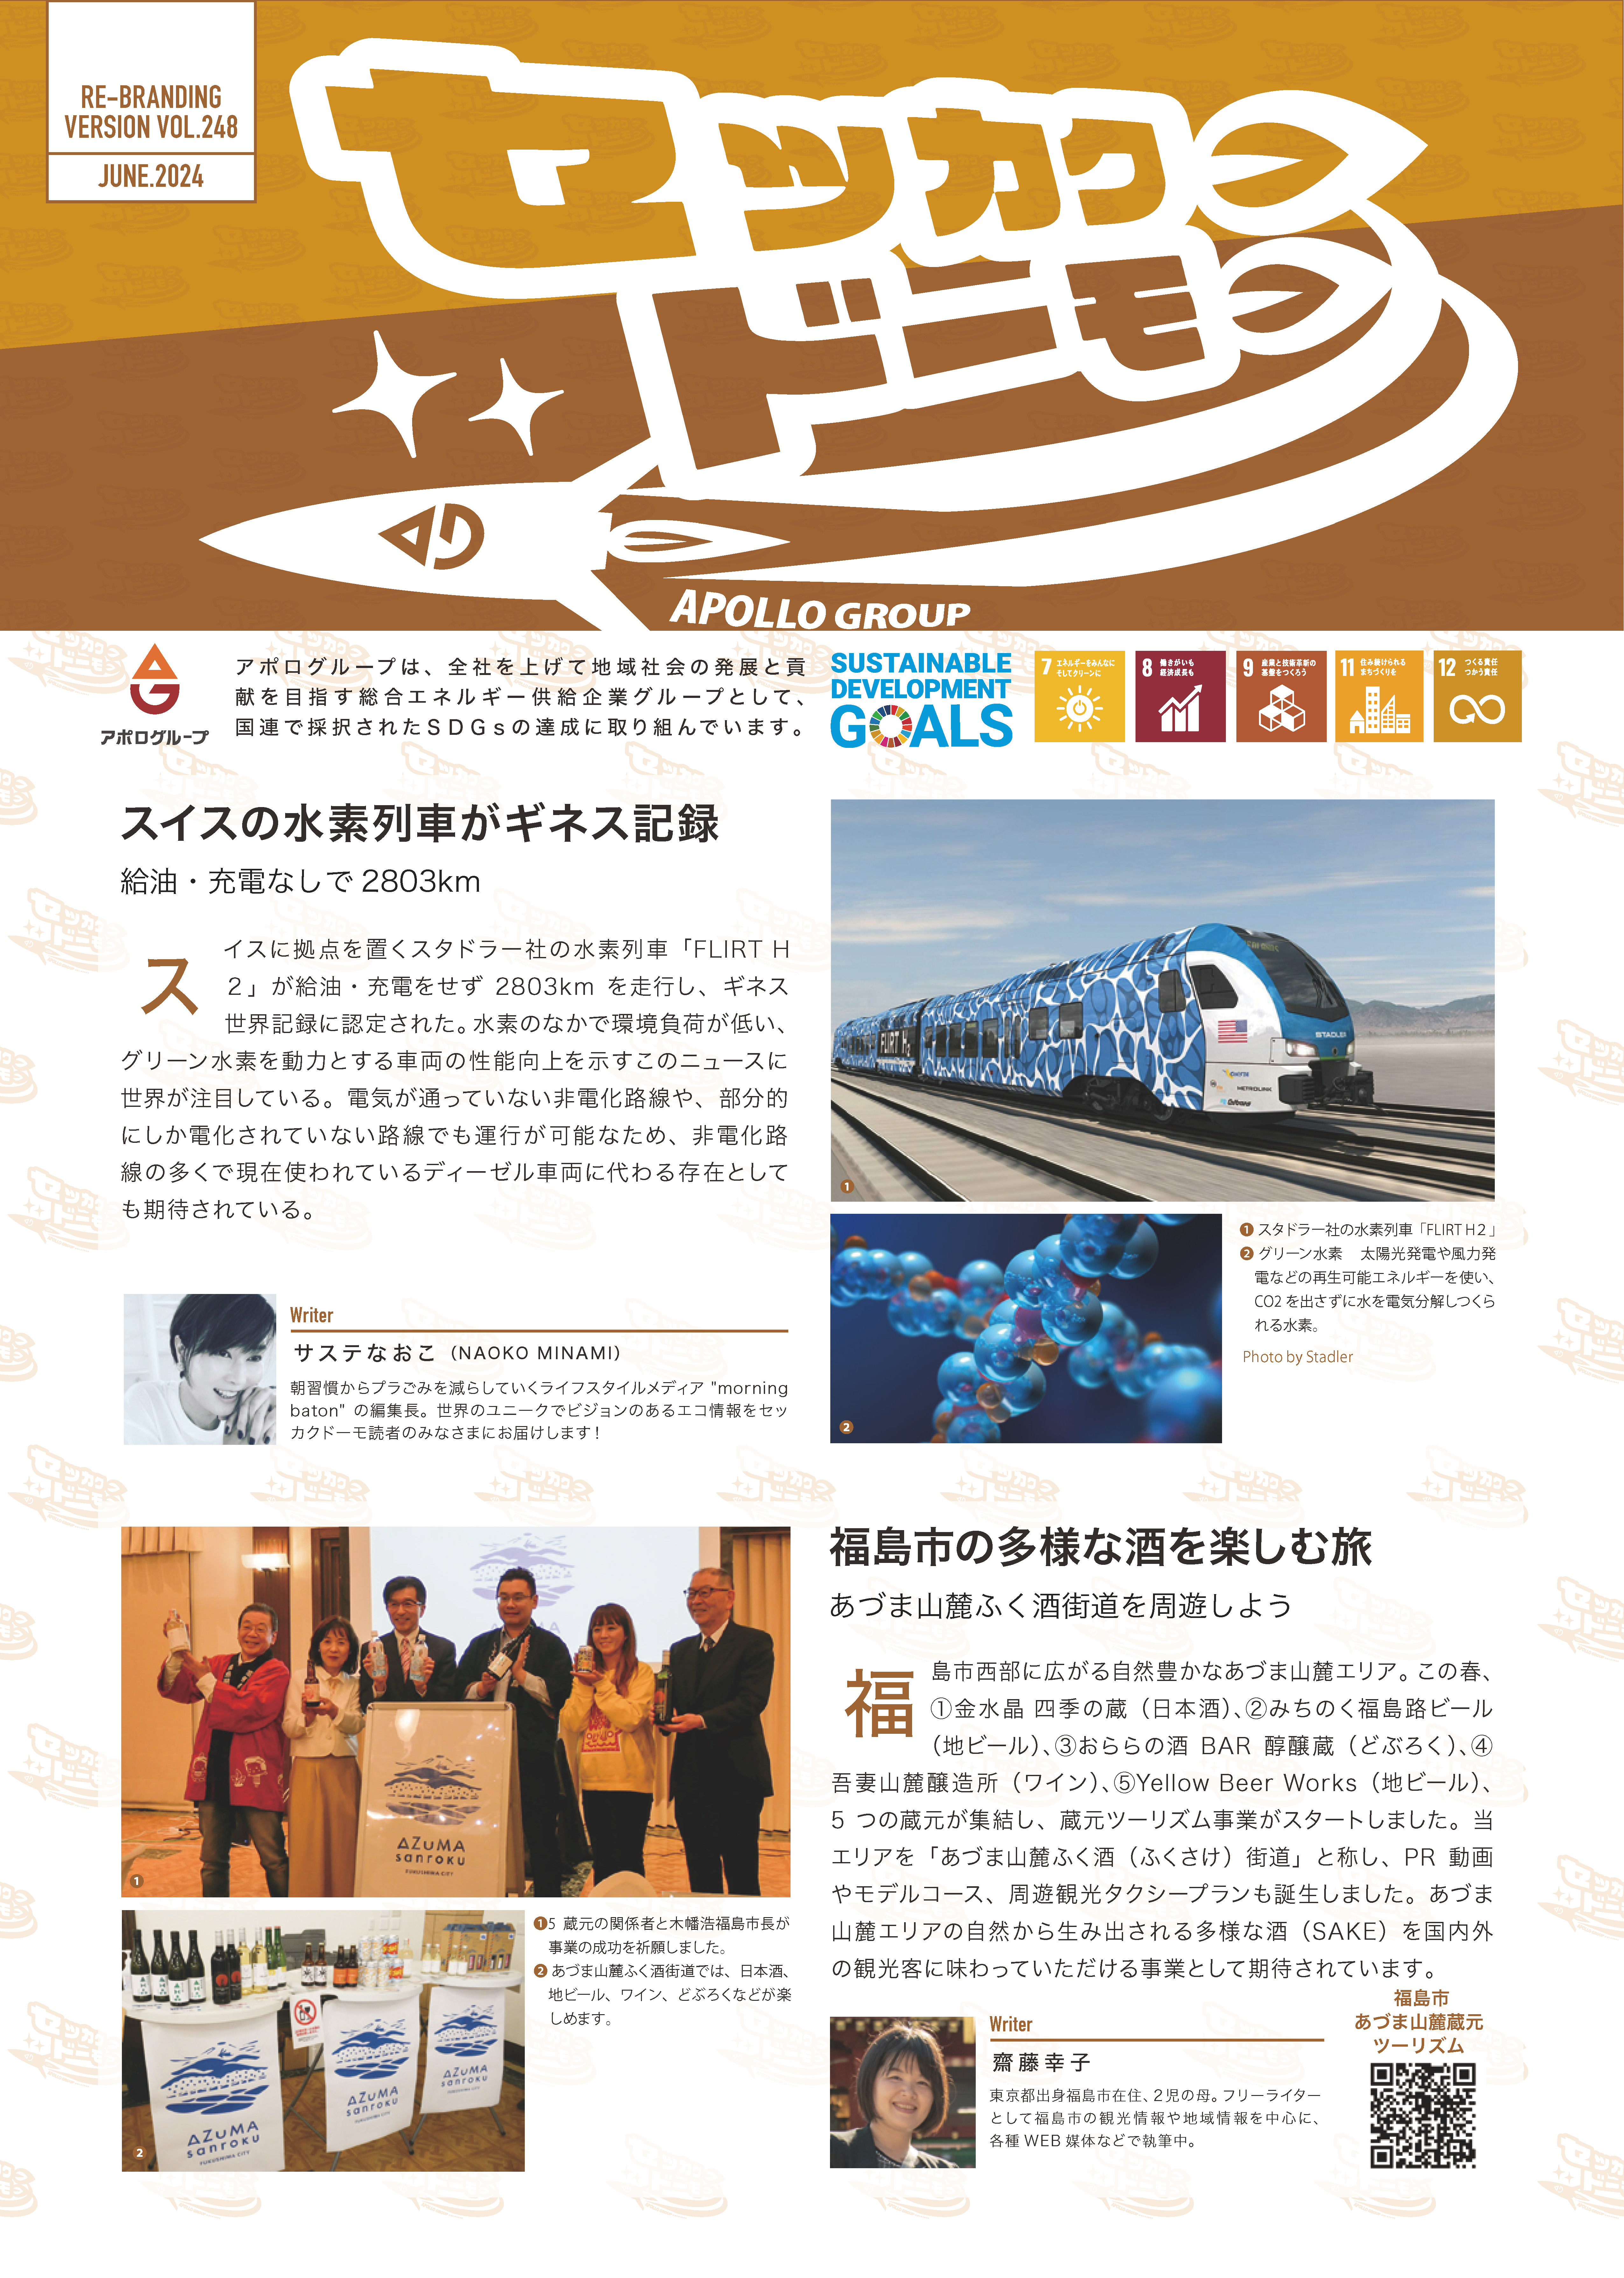 https://www.apollogas.co.jp/news/images/SD248min.png